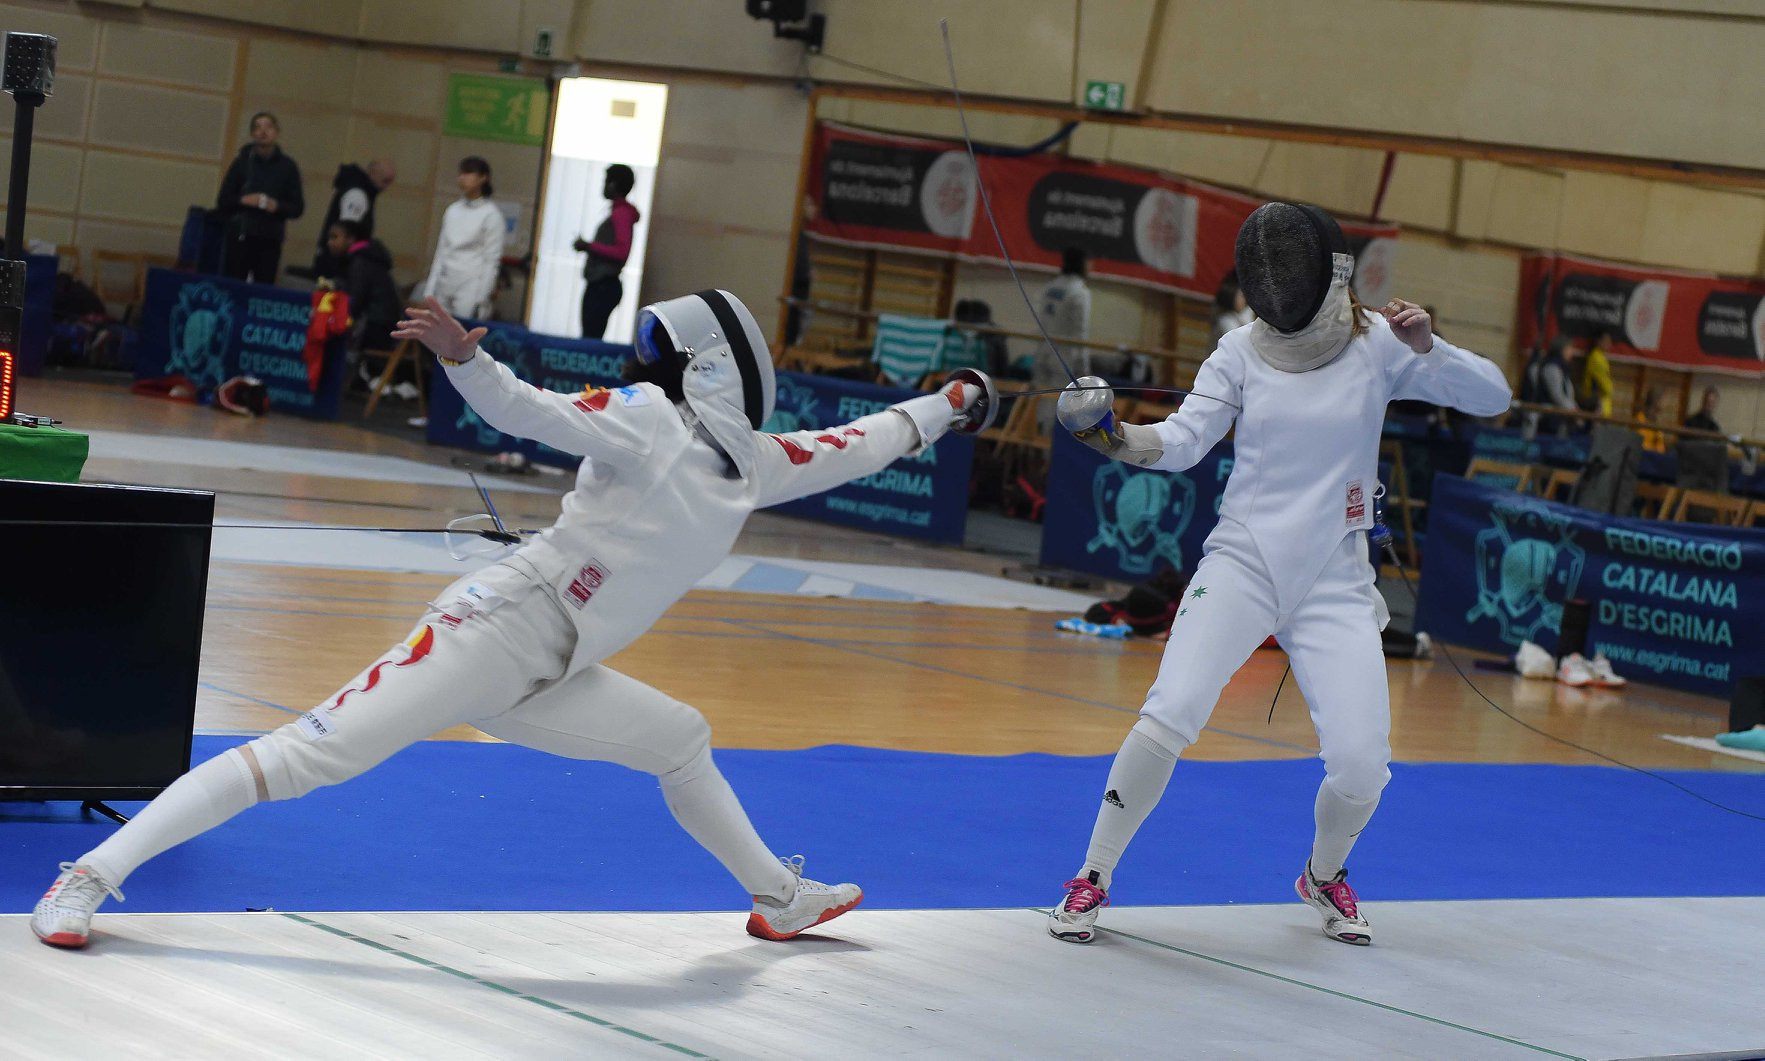 South Korea's Na to face top seed at FIE Women's Épée World Cup in Barcelona